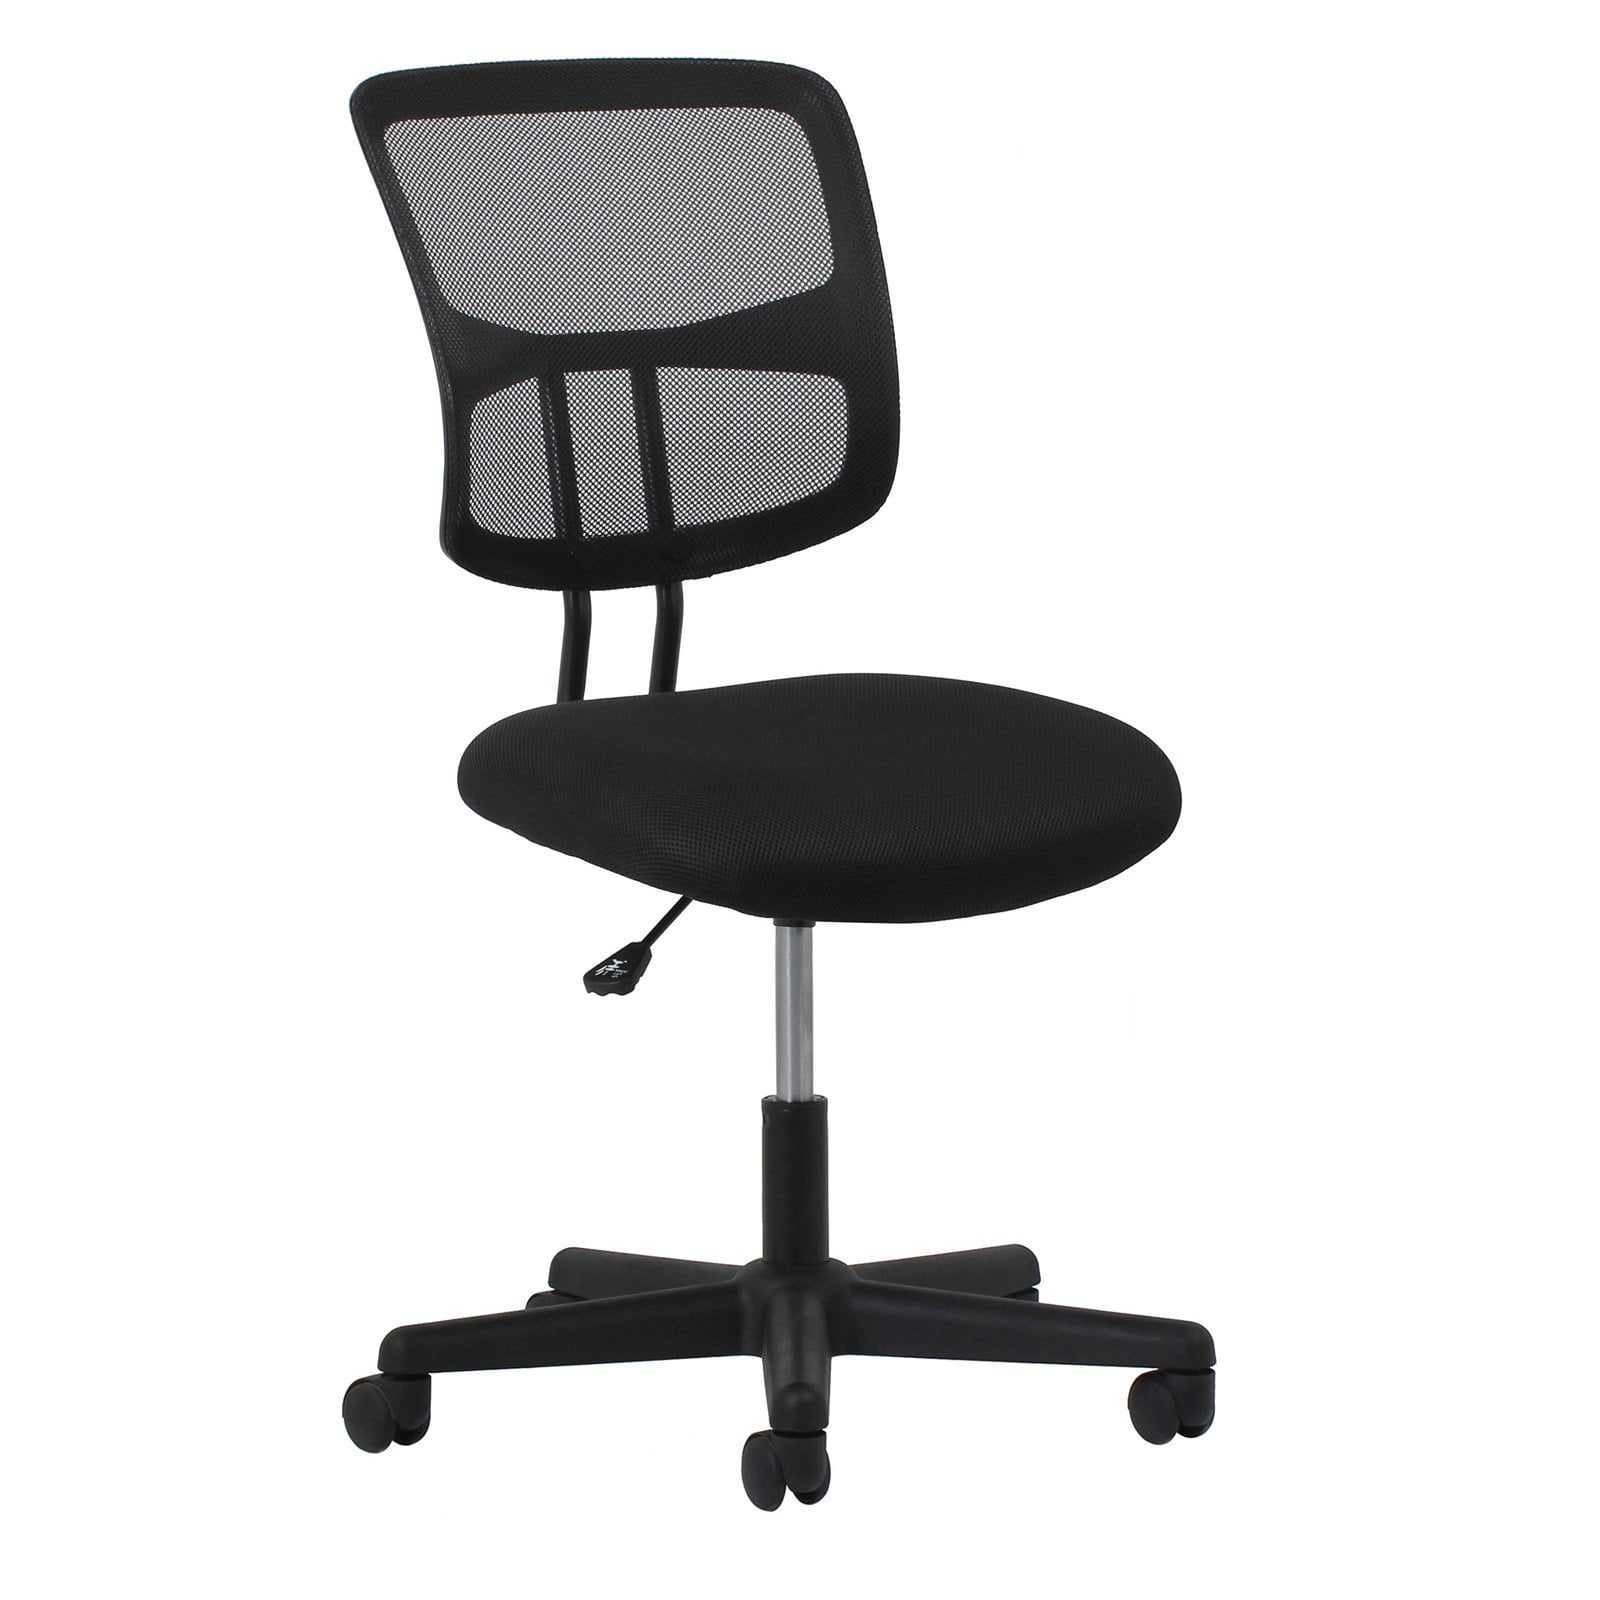 OFM Essentials Collection ESS-3060 Upholstered Armless Swivel Task Chair Black 